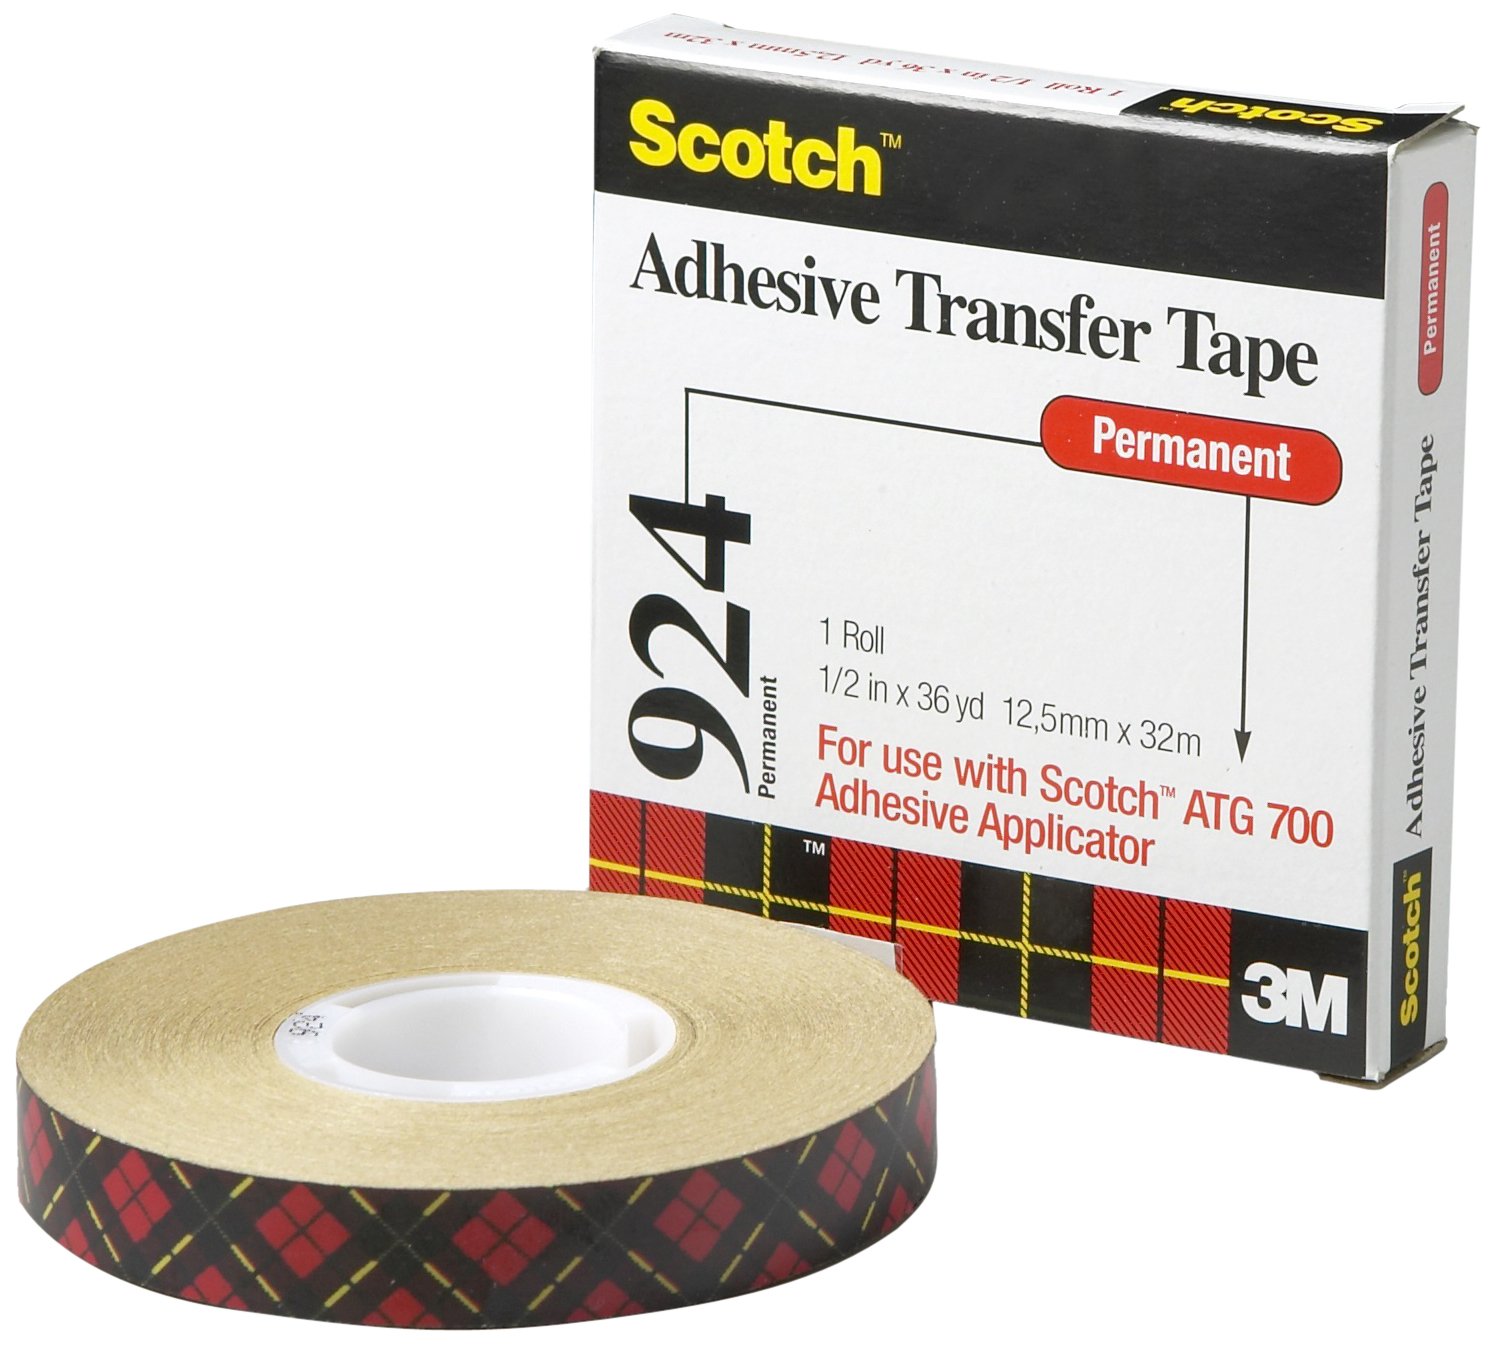 What Is Adhesive Transfer Tape Used For